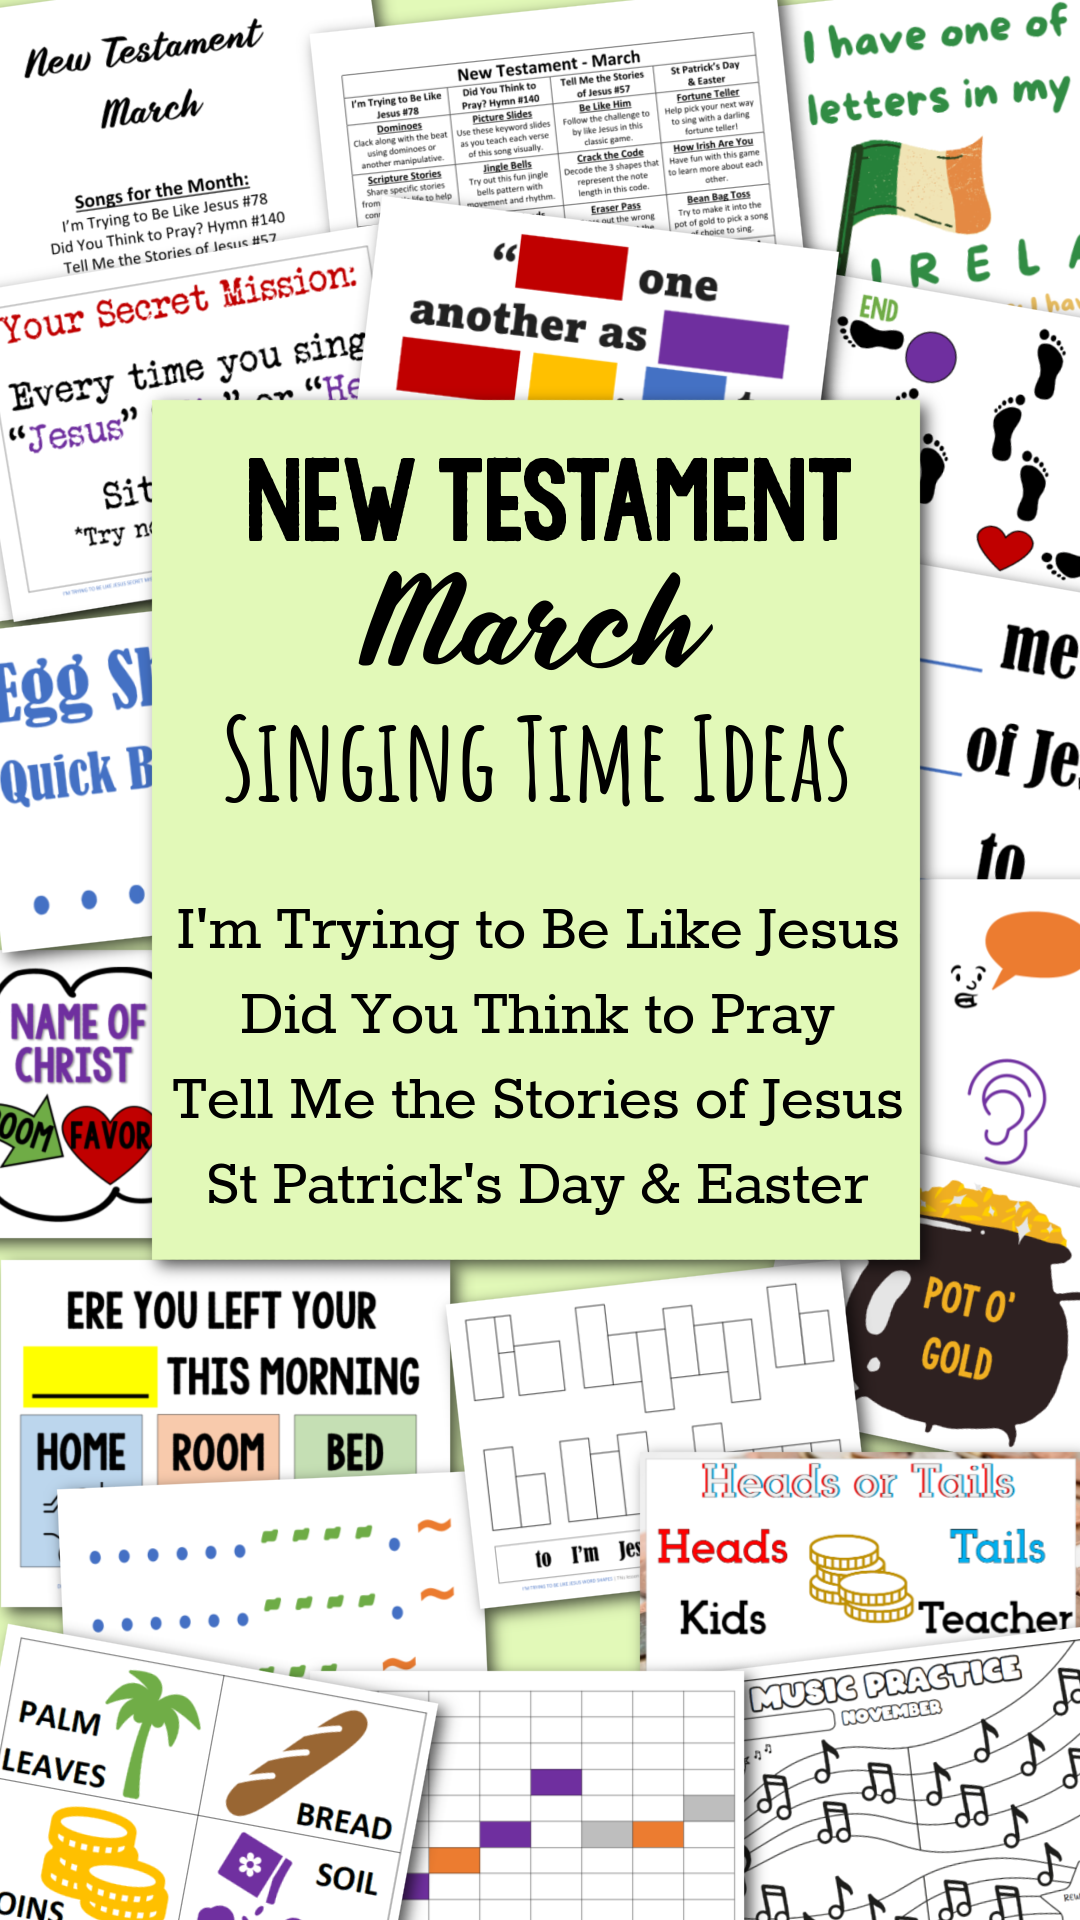 New Testament March Primary Songs Easy ideas for Music Leaders NT March Singing Time Ideas